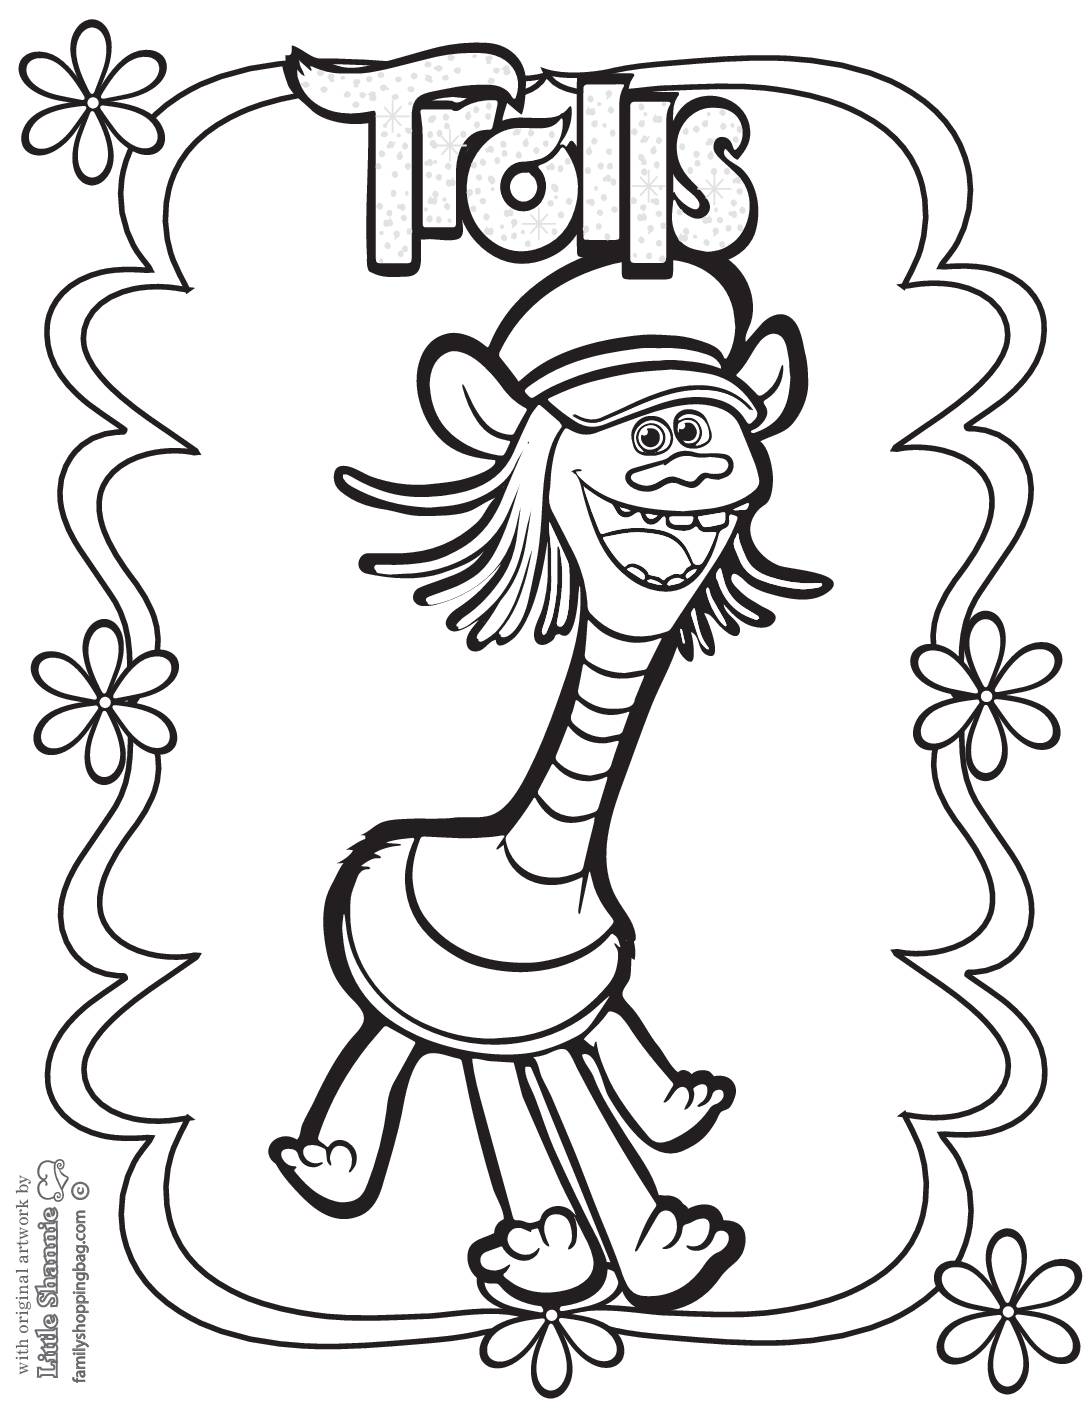 Coloring Page 6 Trolls Coloring Pages